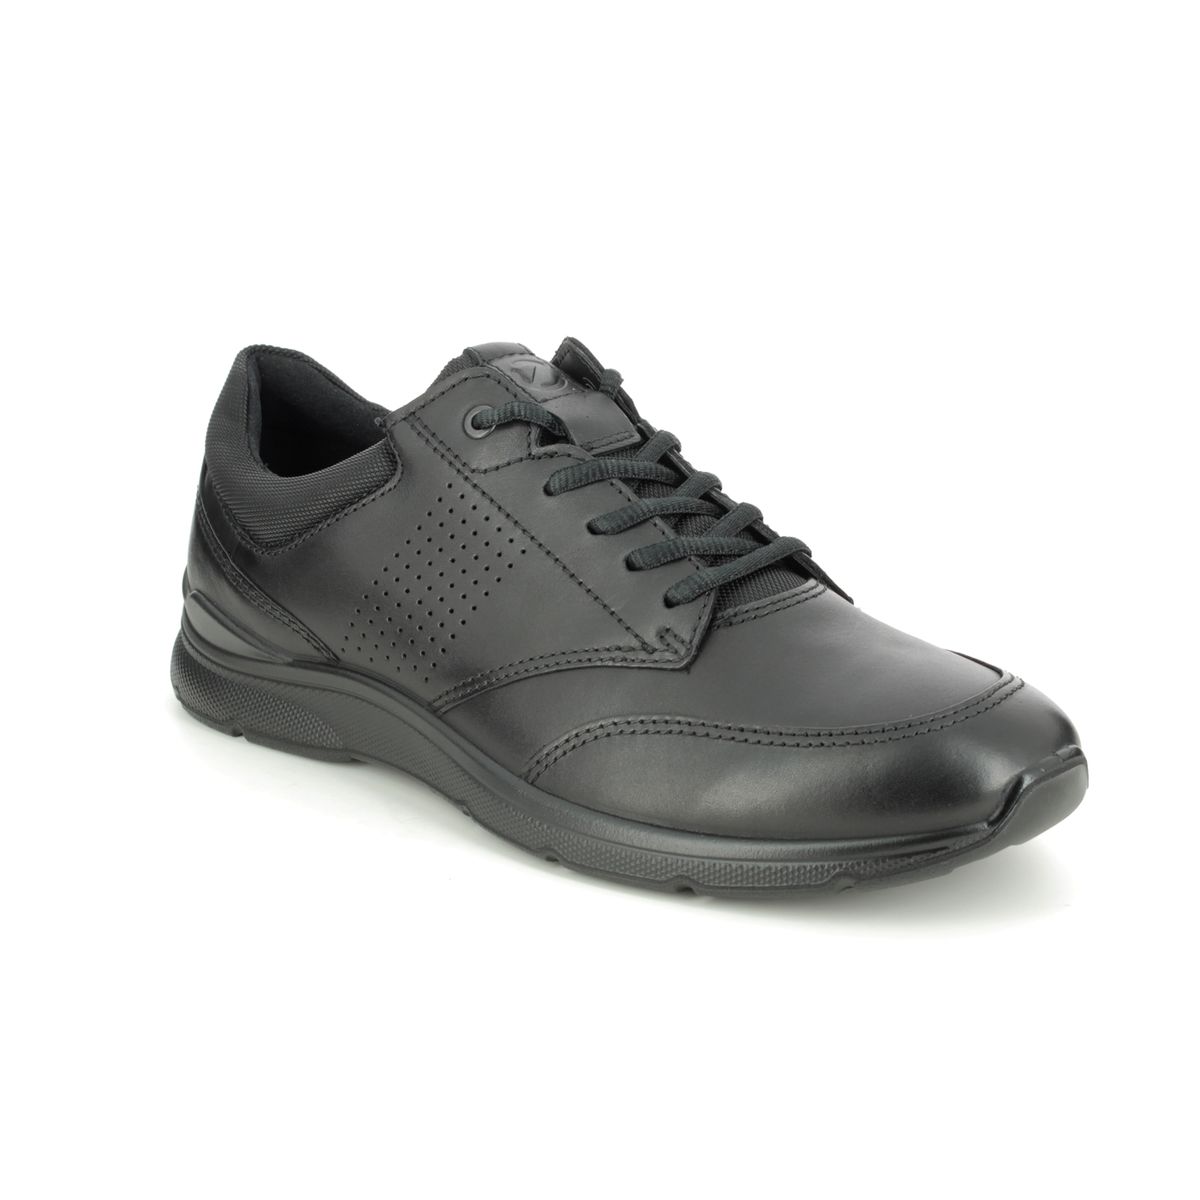 Ecco Irving Black Leather Mens Comfort Shoes 511734-51052 In Size 42 In Plain Black Leather